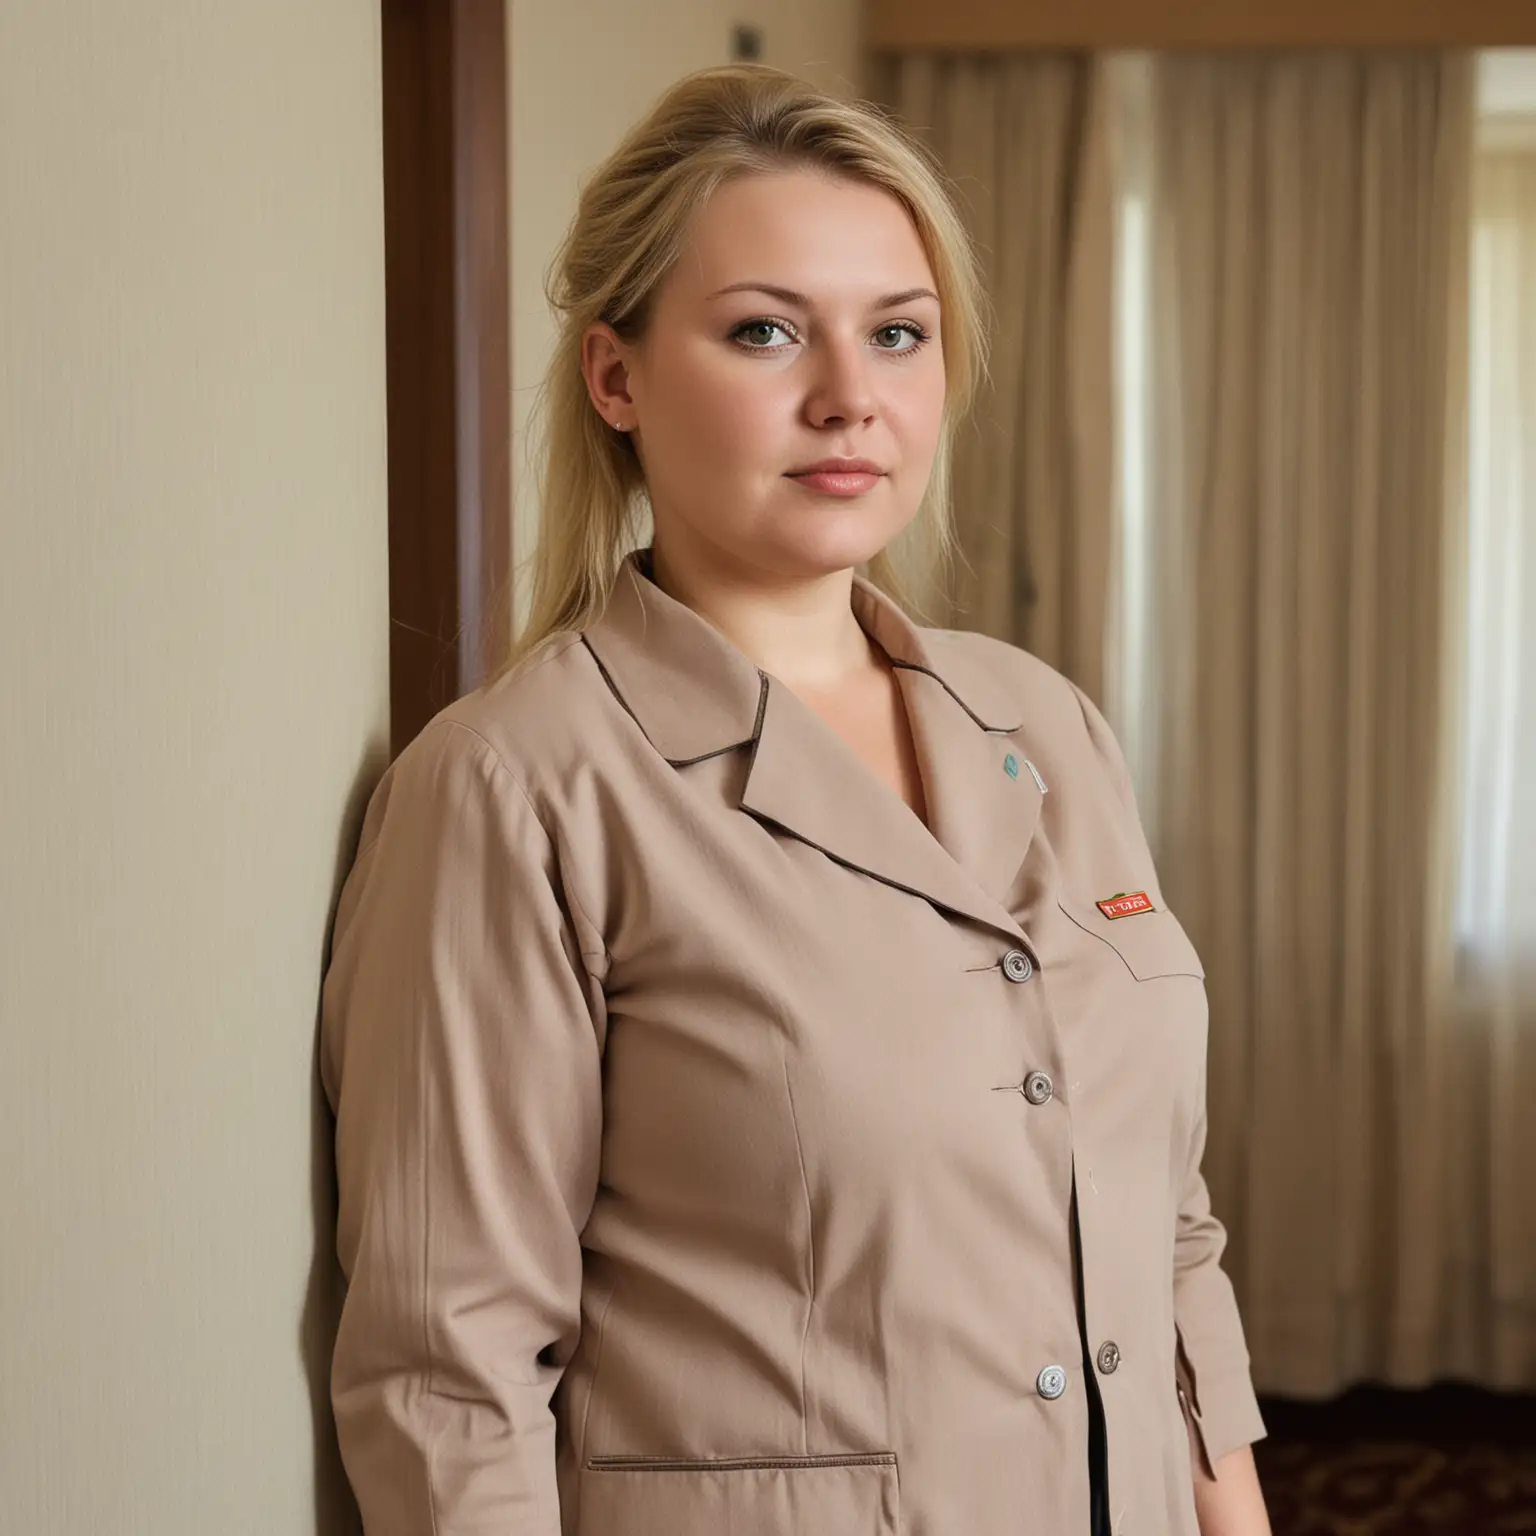 Lithuanian Hotel Cleaner Surrounded by Plump Women